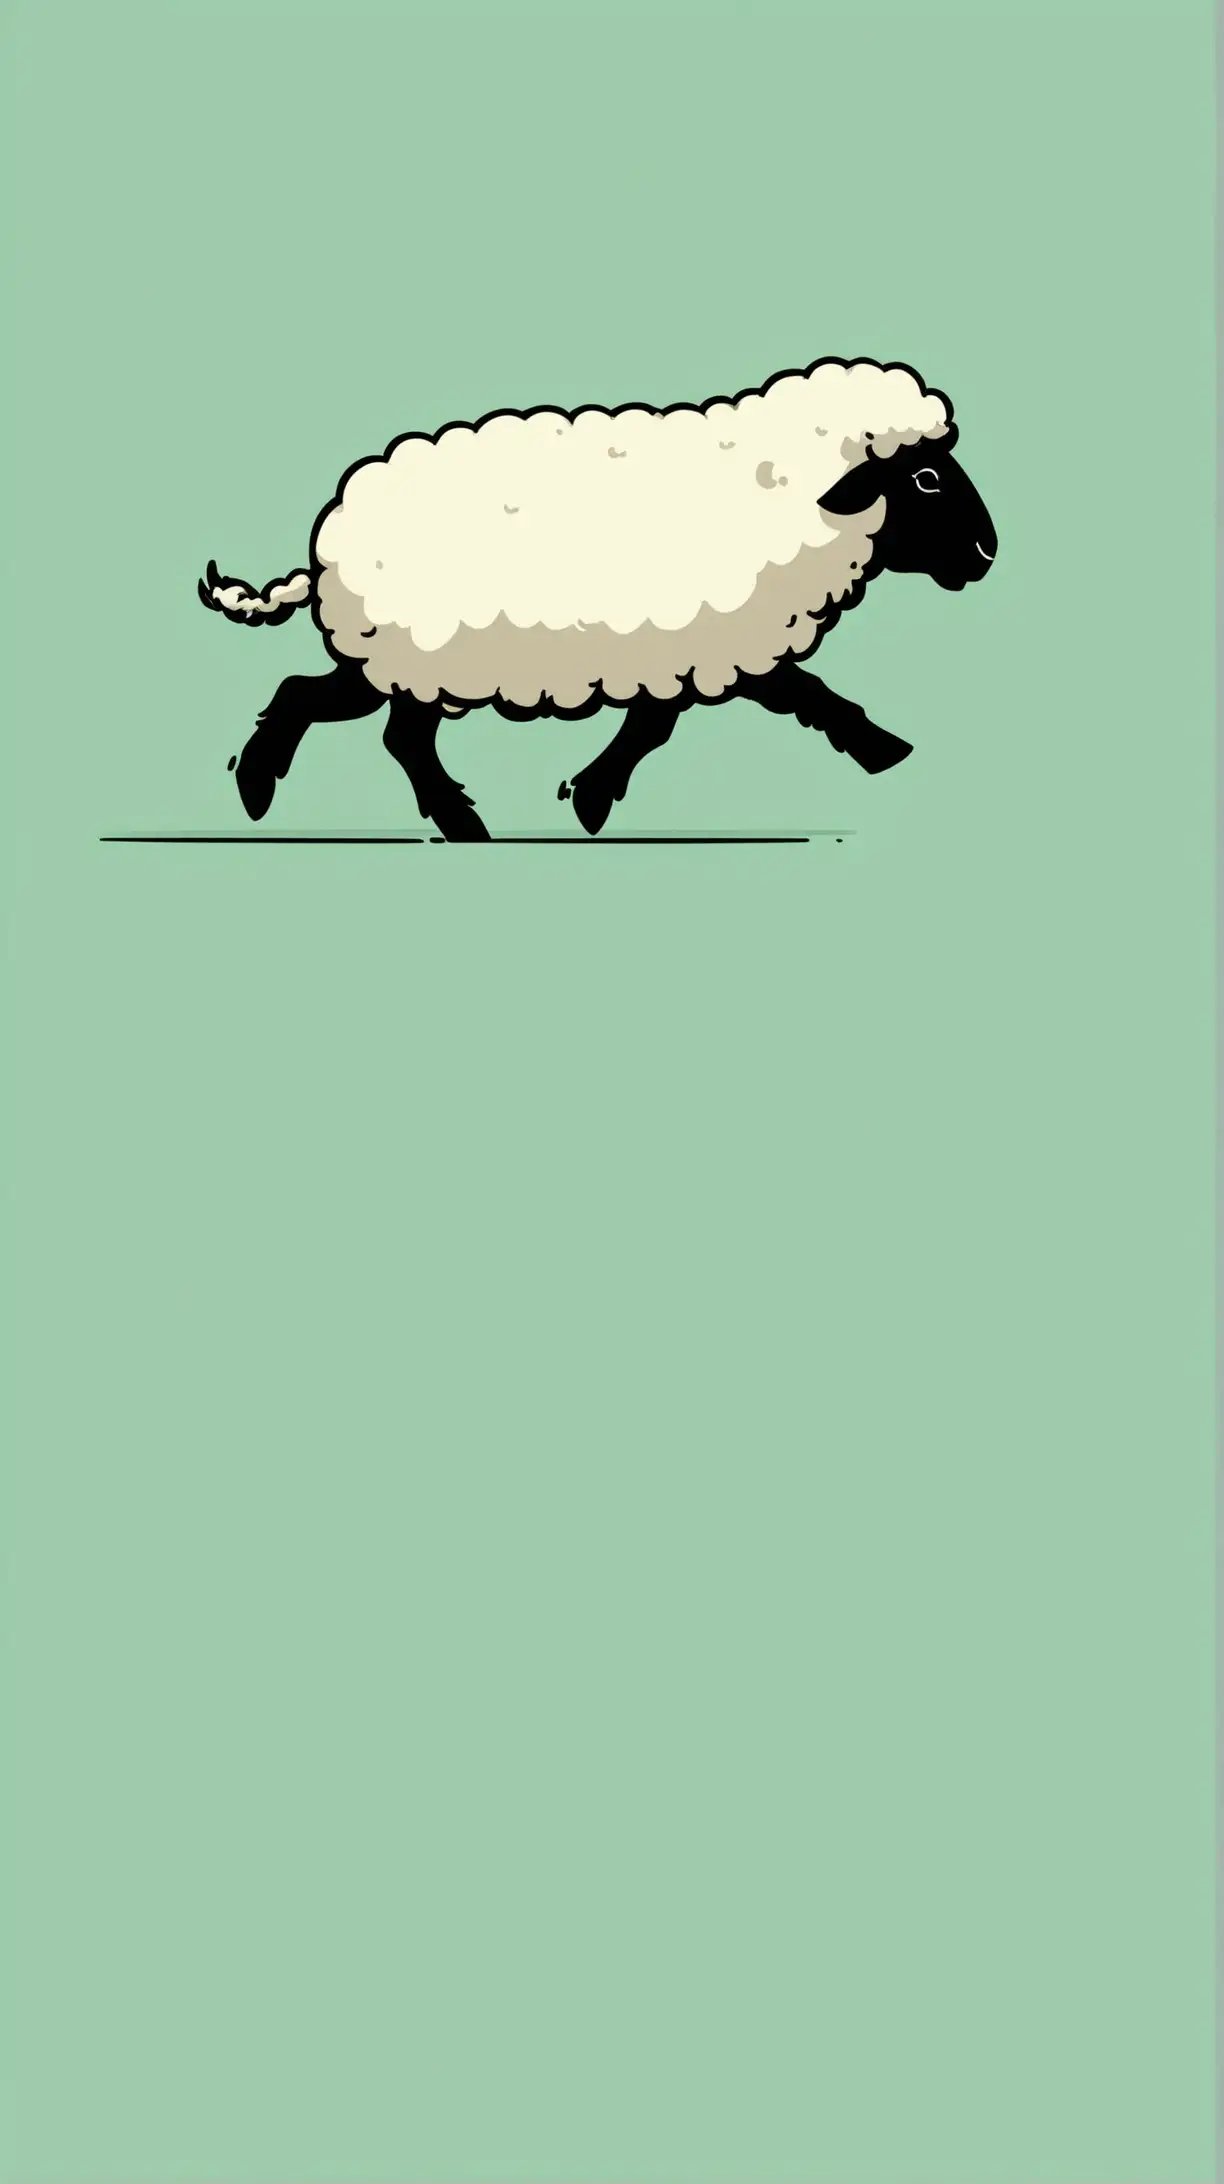 Sheep Walking in Comic Book Style with Simple Background